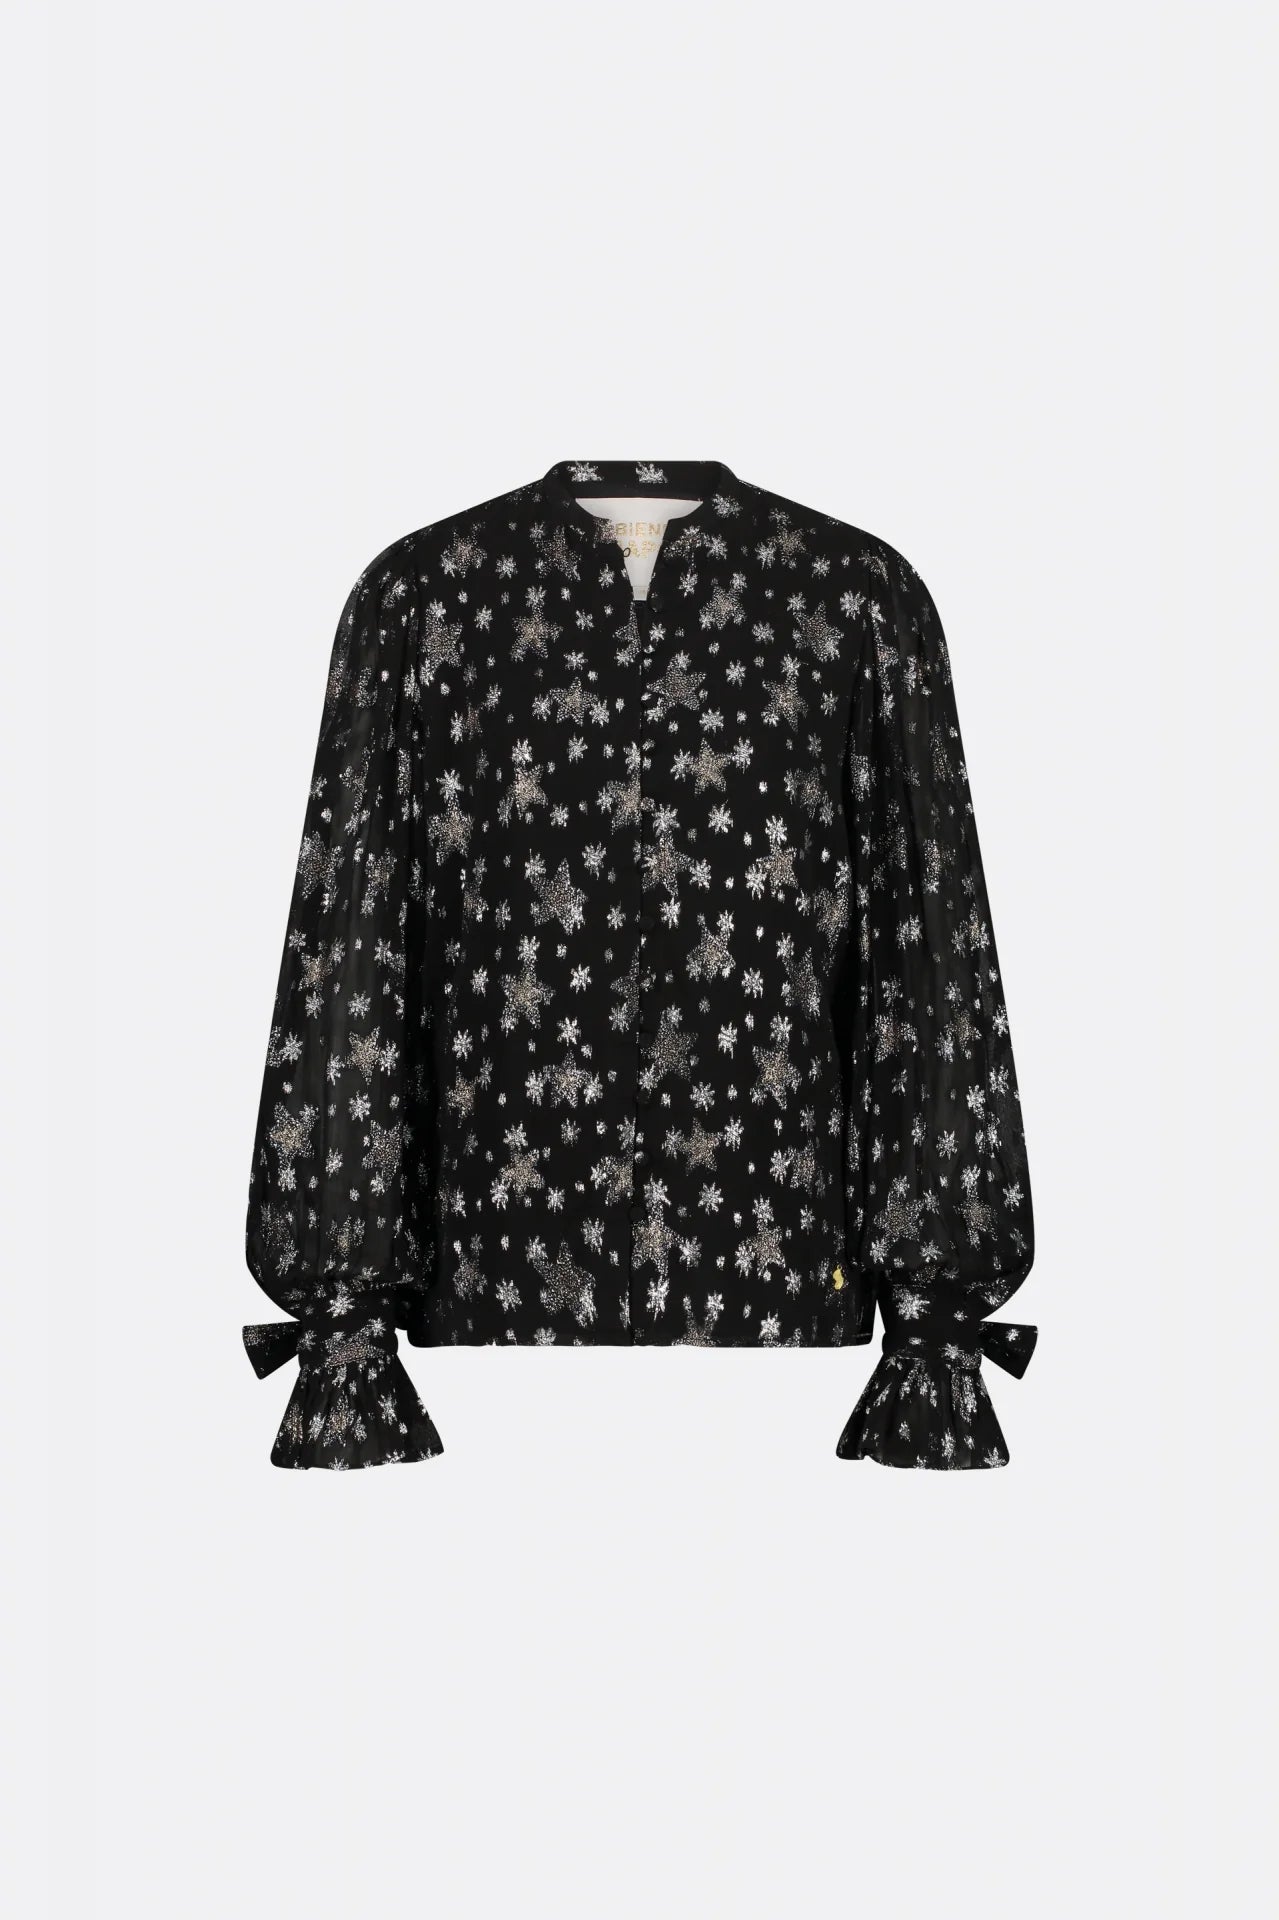 A black Kylie blouse with fabric-covered button closure and black flowers on it, by Fabienne Chapot.